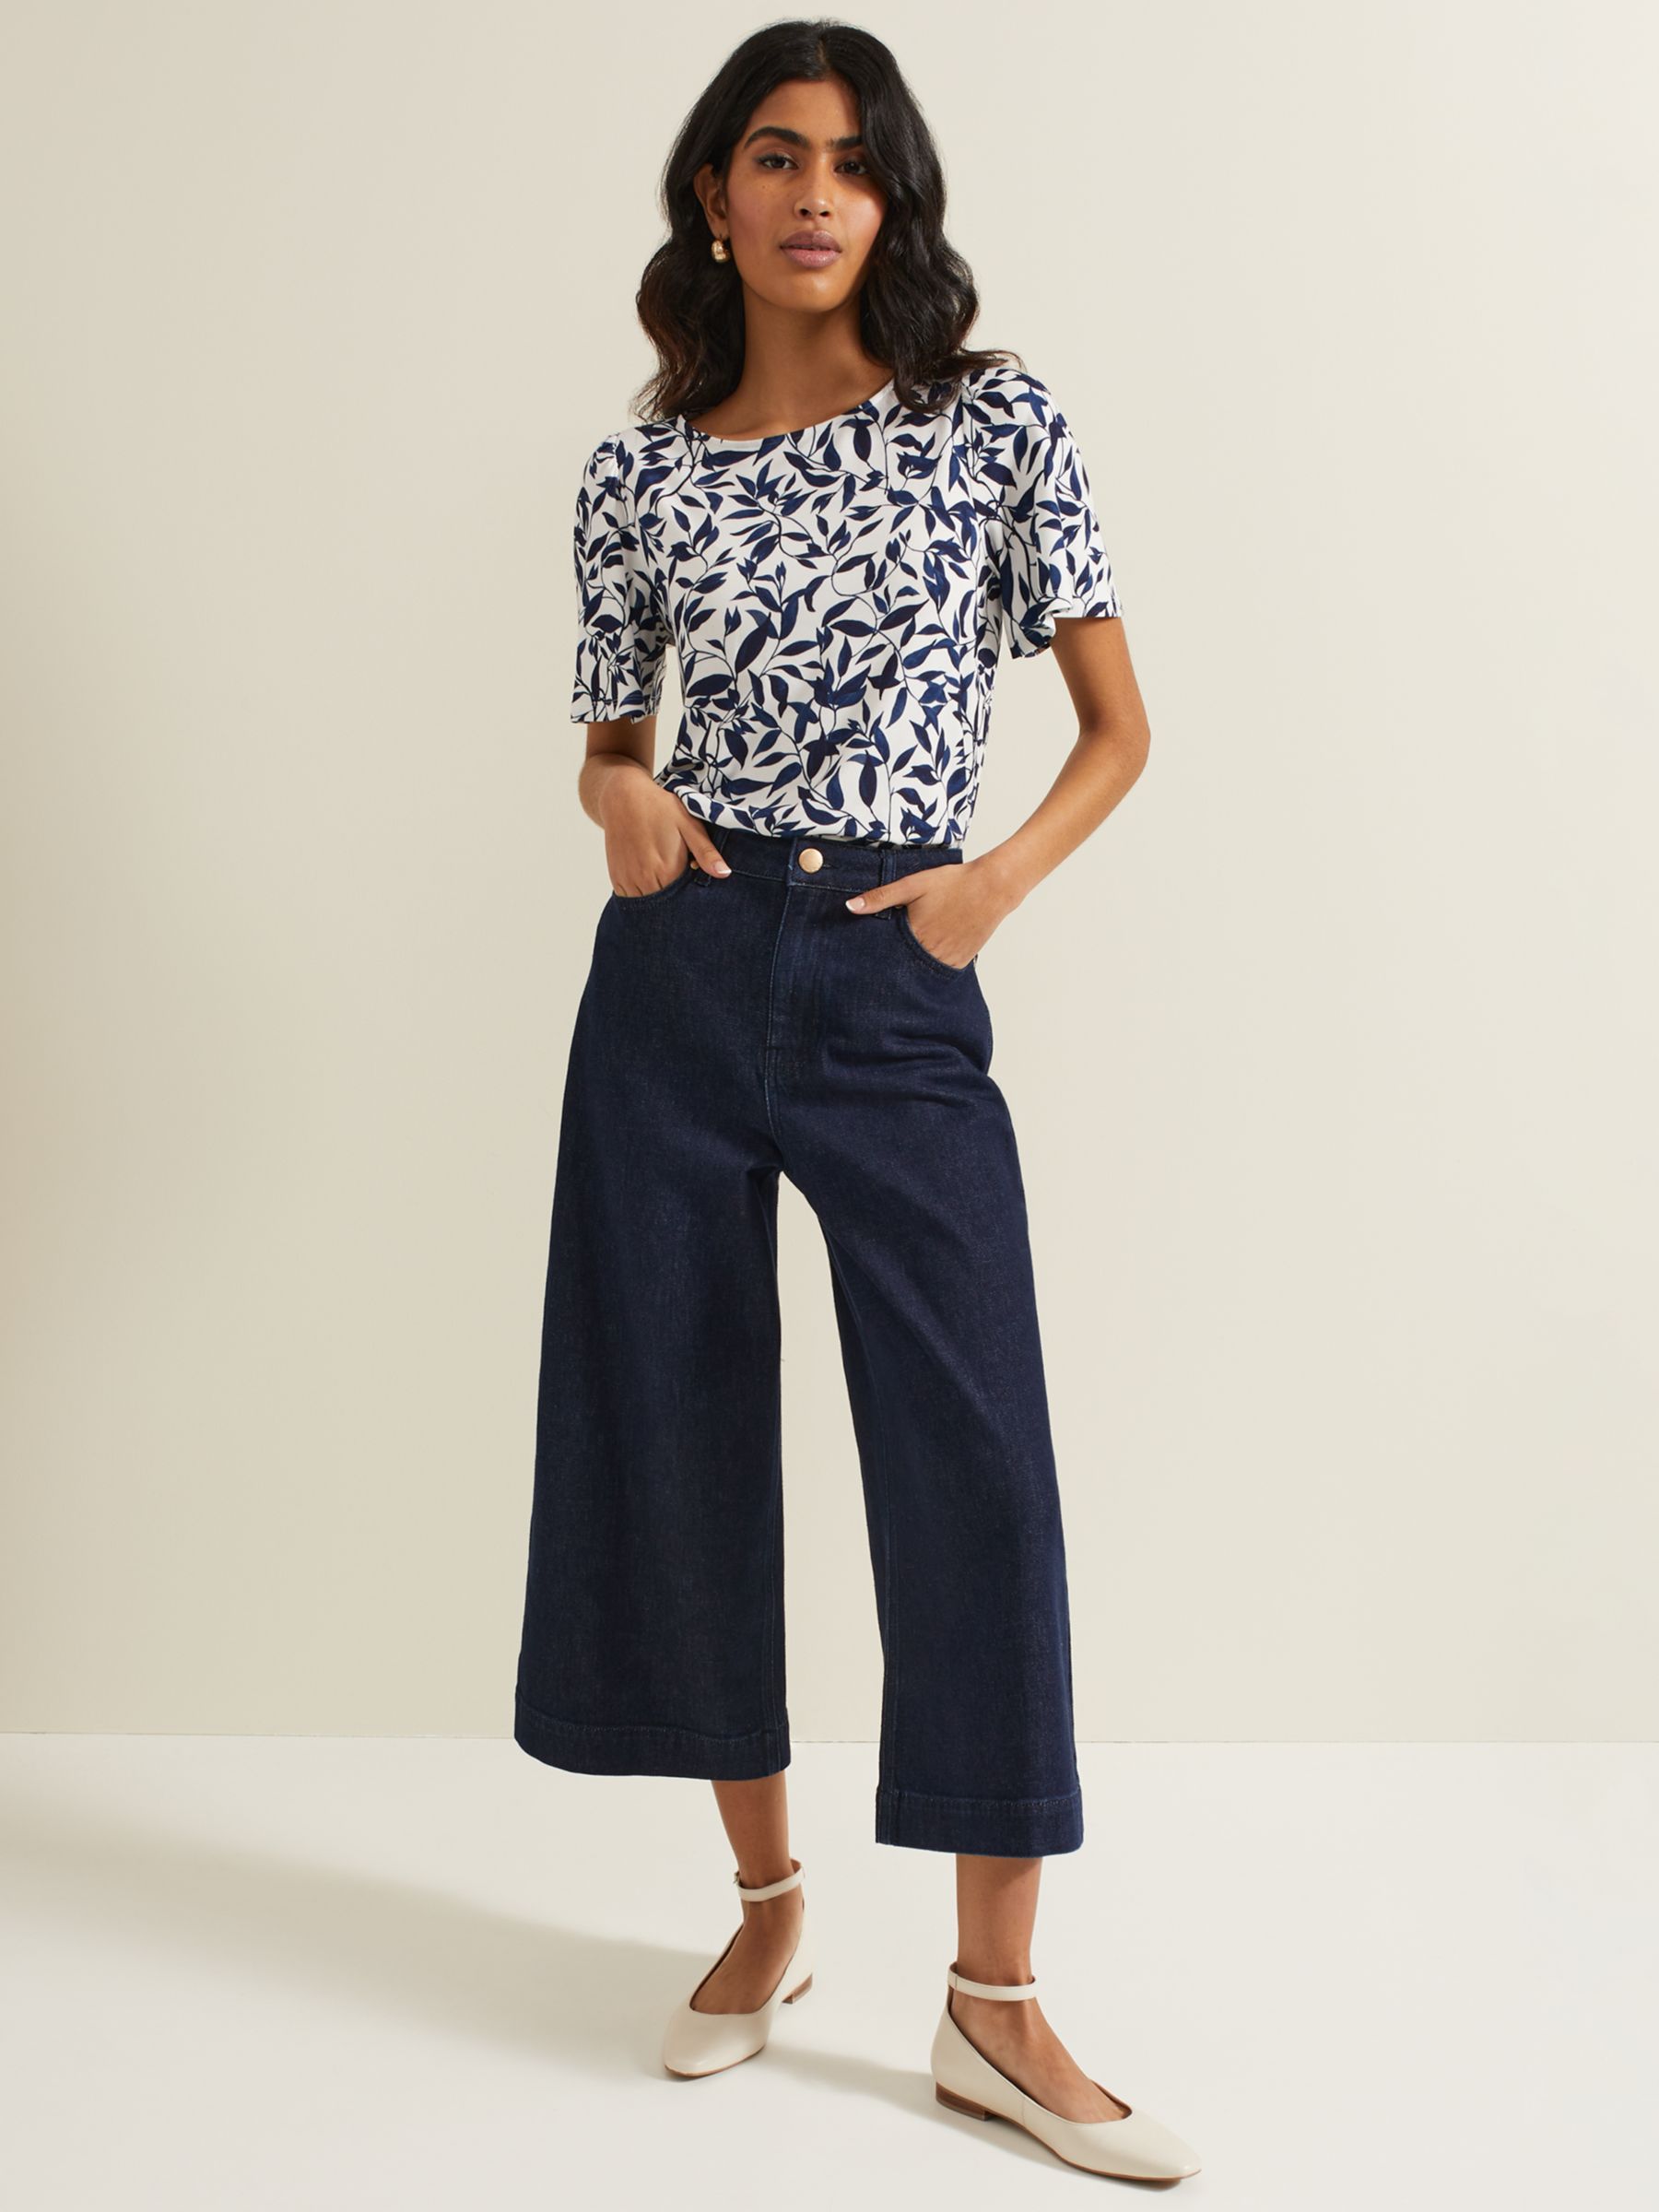 Buy Phase Eight Nayana Leaf Print Top, Navy/White Online at johnlewis.com